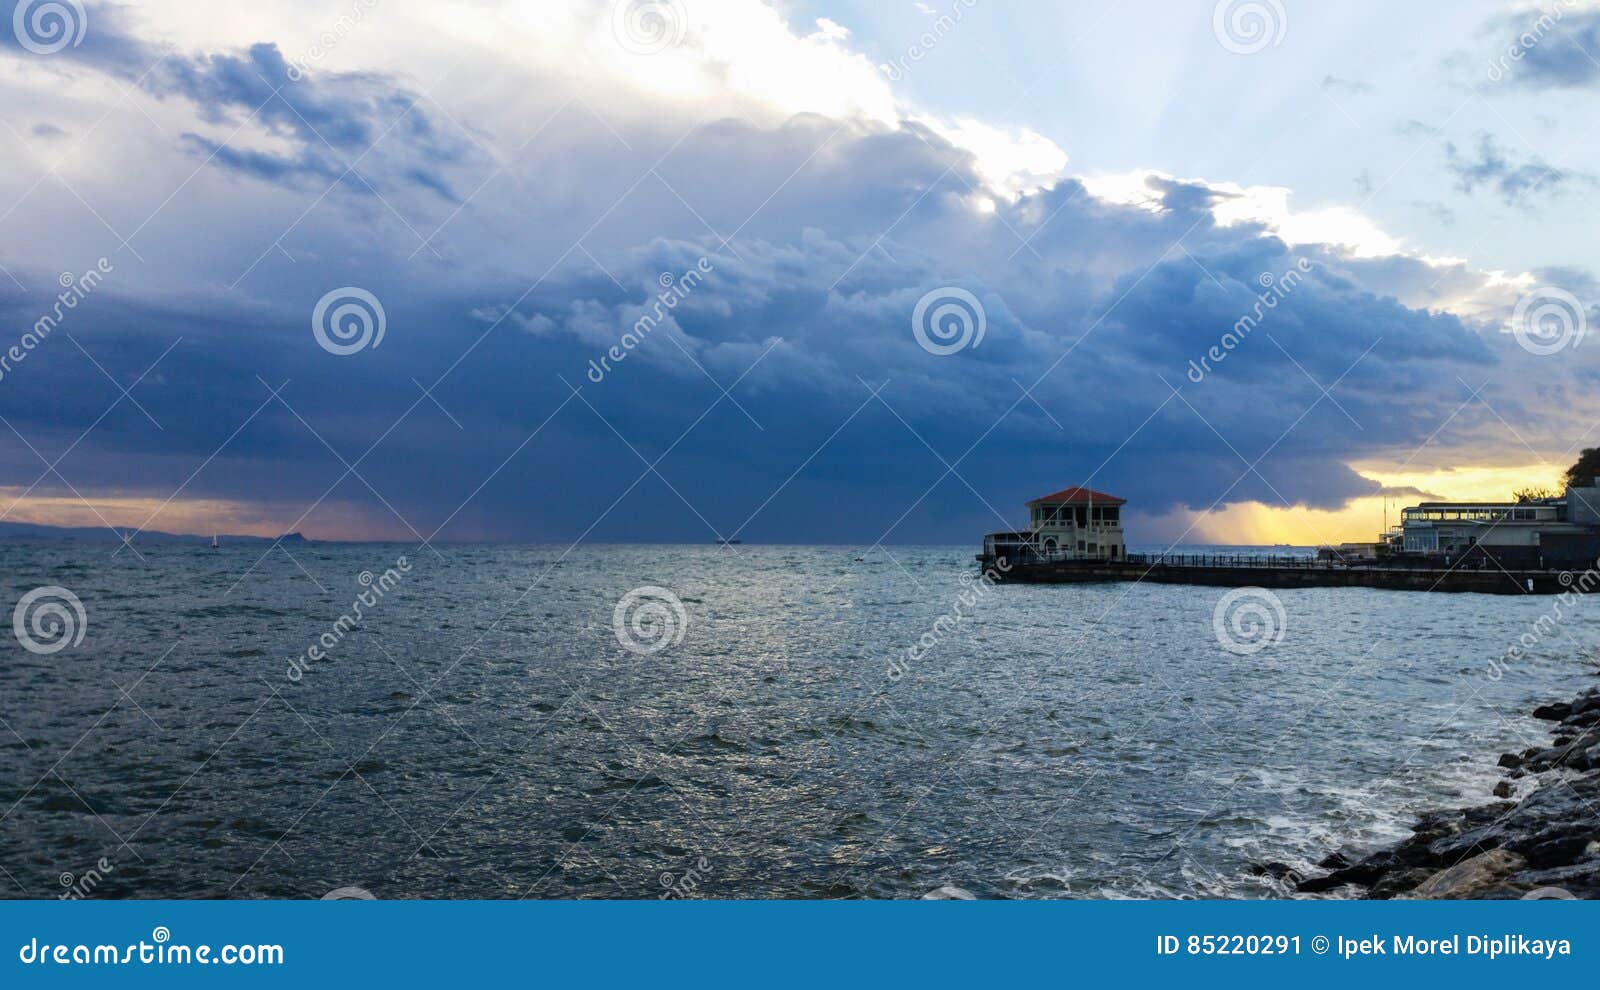 dramatic view of the sea and the pier in moda, istanbul city